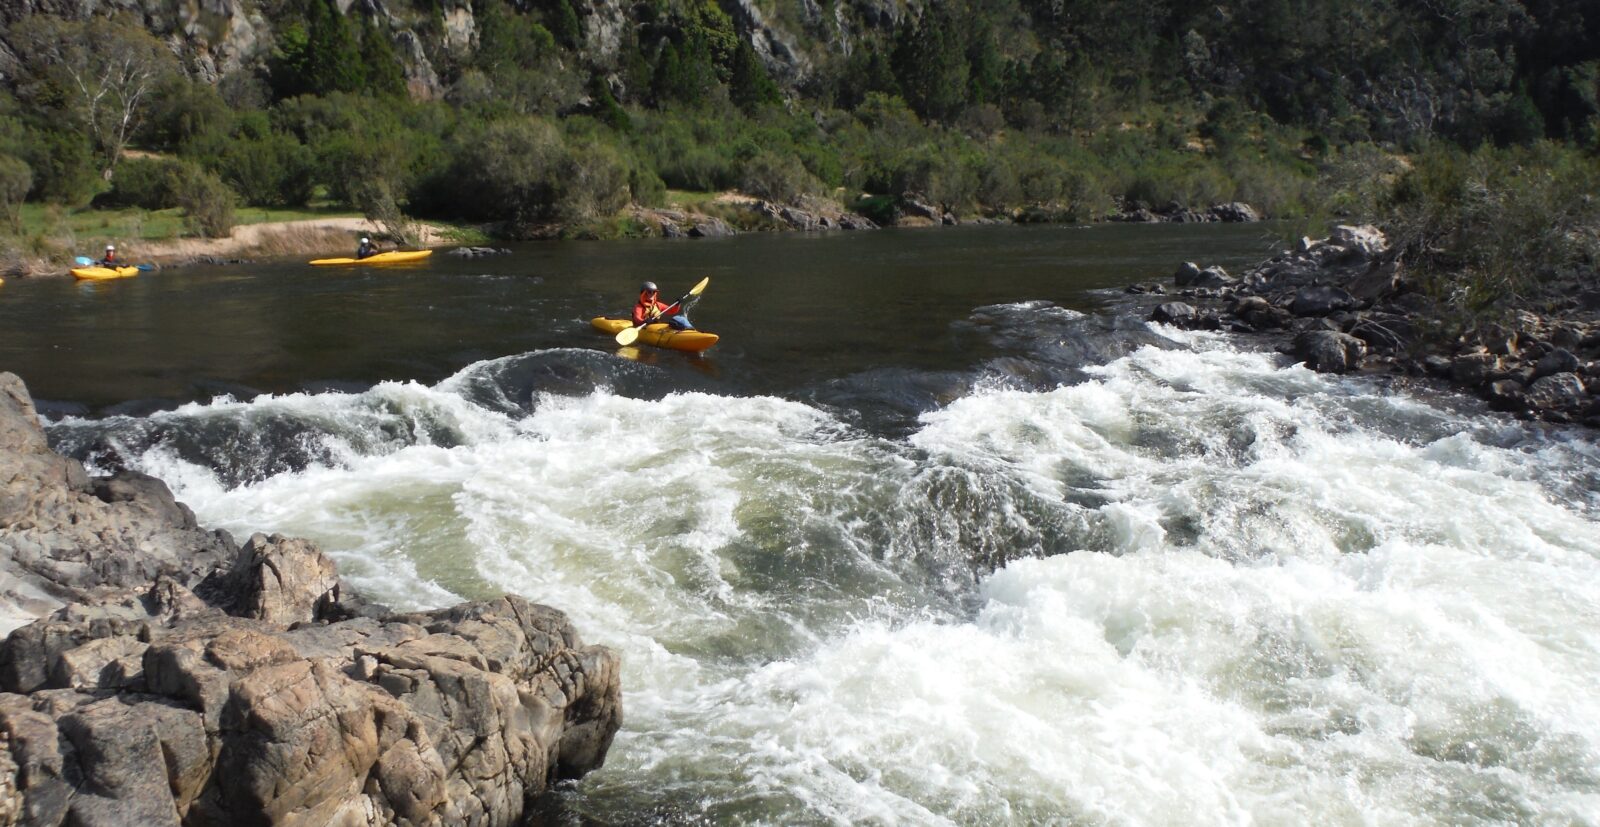 A nervous kayaker lines up on a rapid during the Walking Rivers Snow River, two other Kayaks waiting